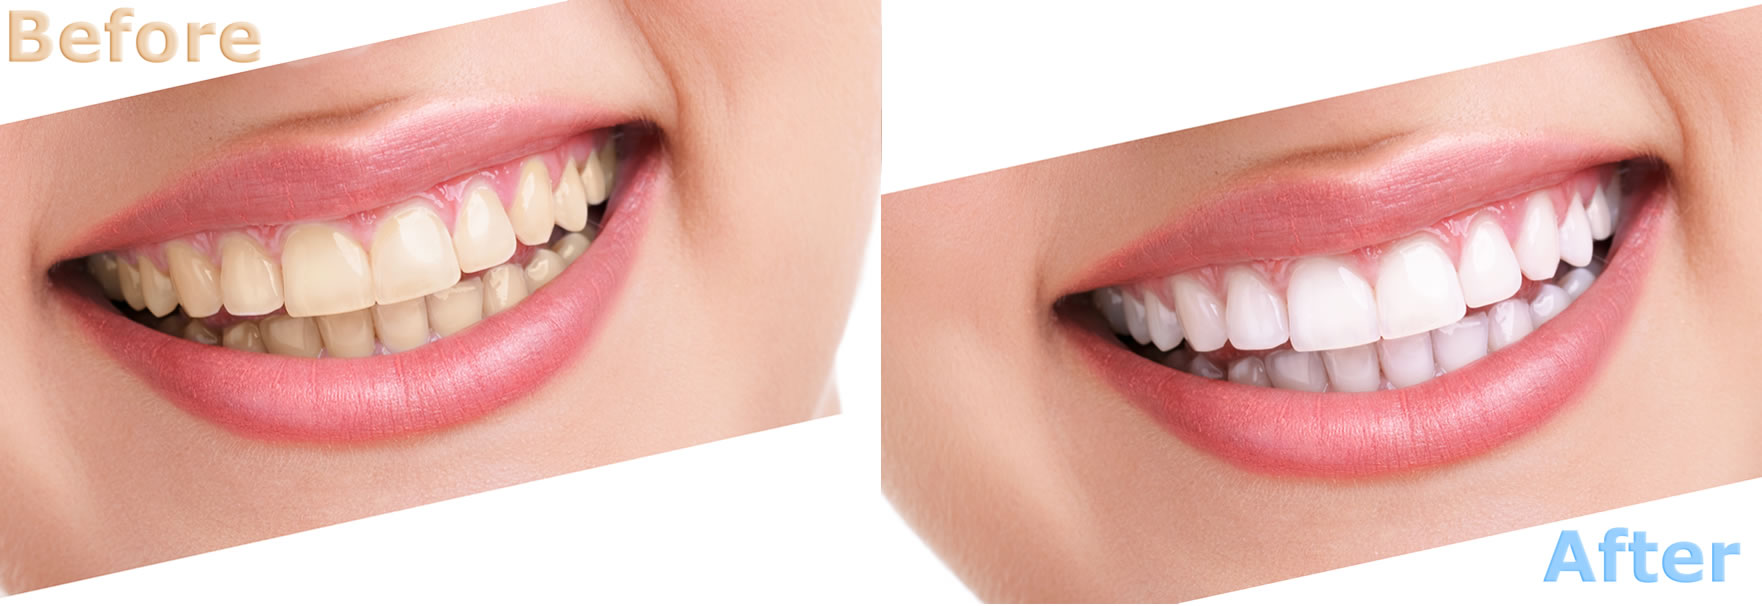 Cosmetic Dentistry Makeover